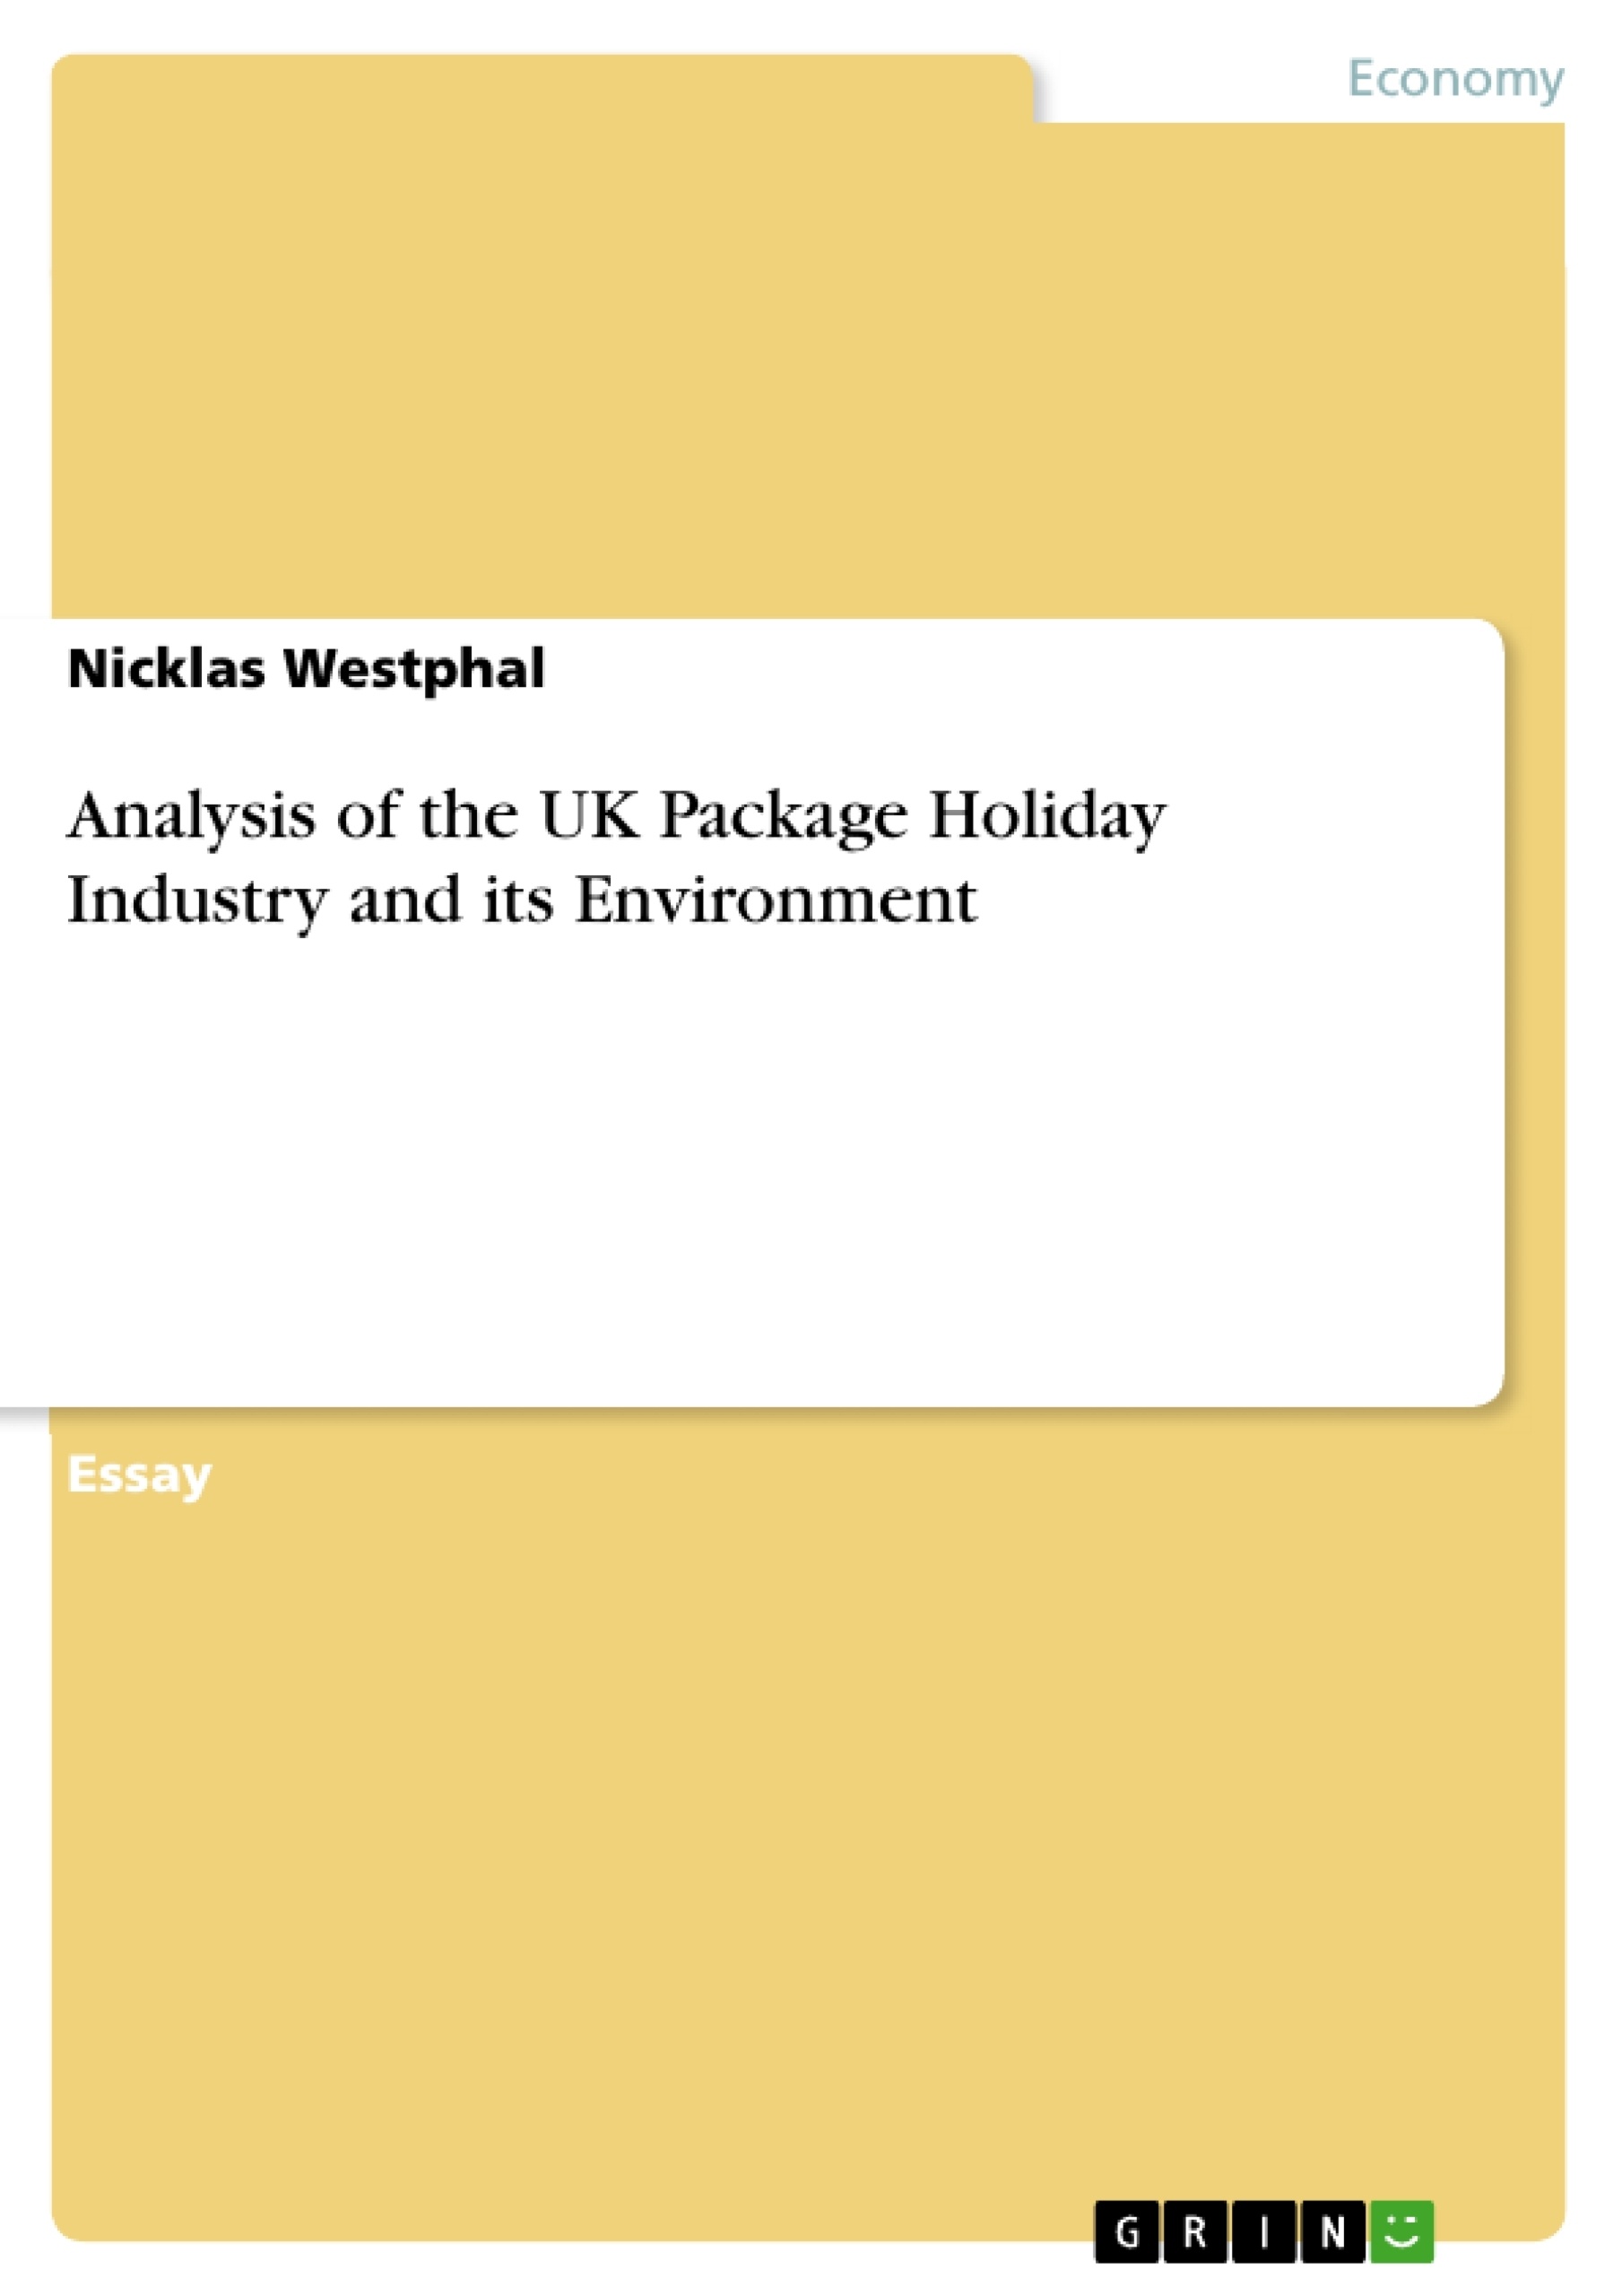 Title: Analysis of the UK Package Holiday Industry and its Environment